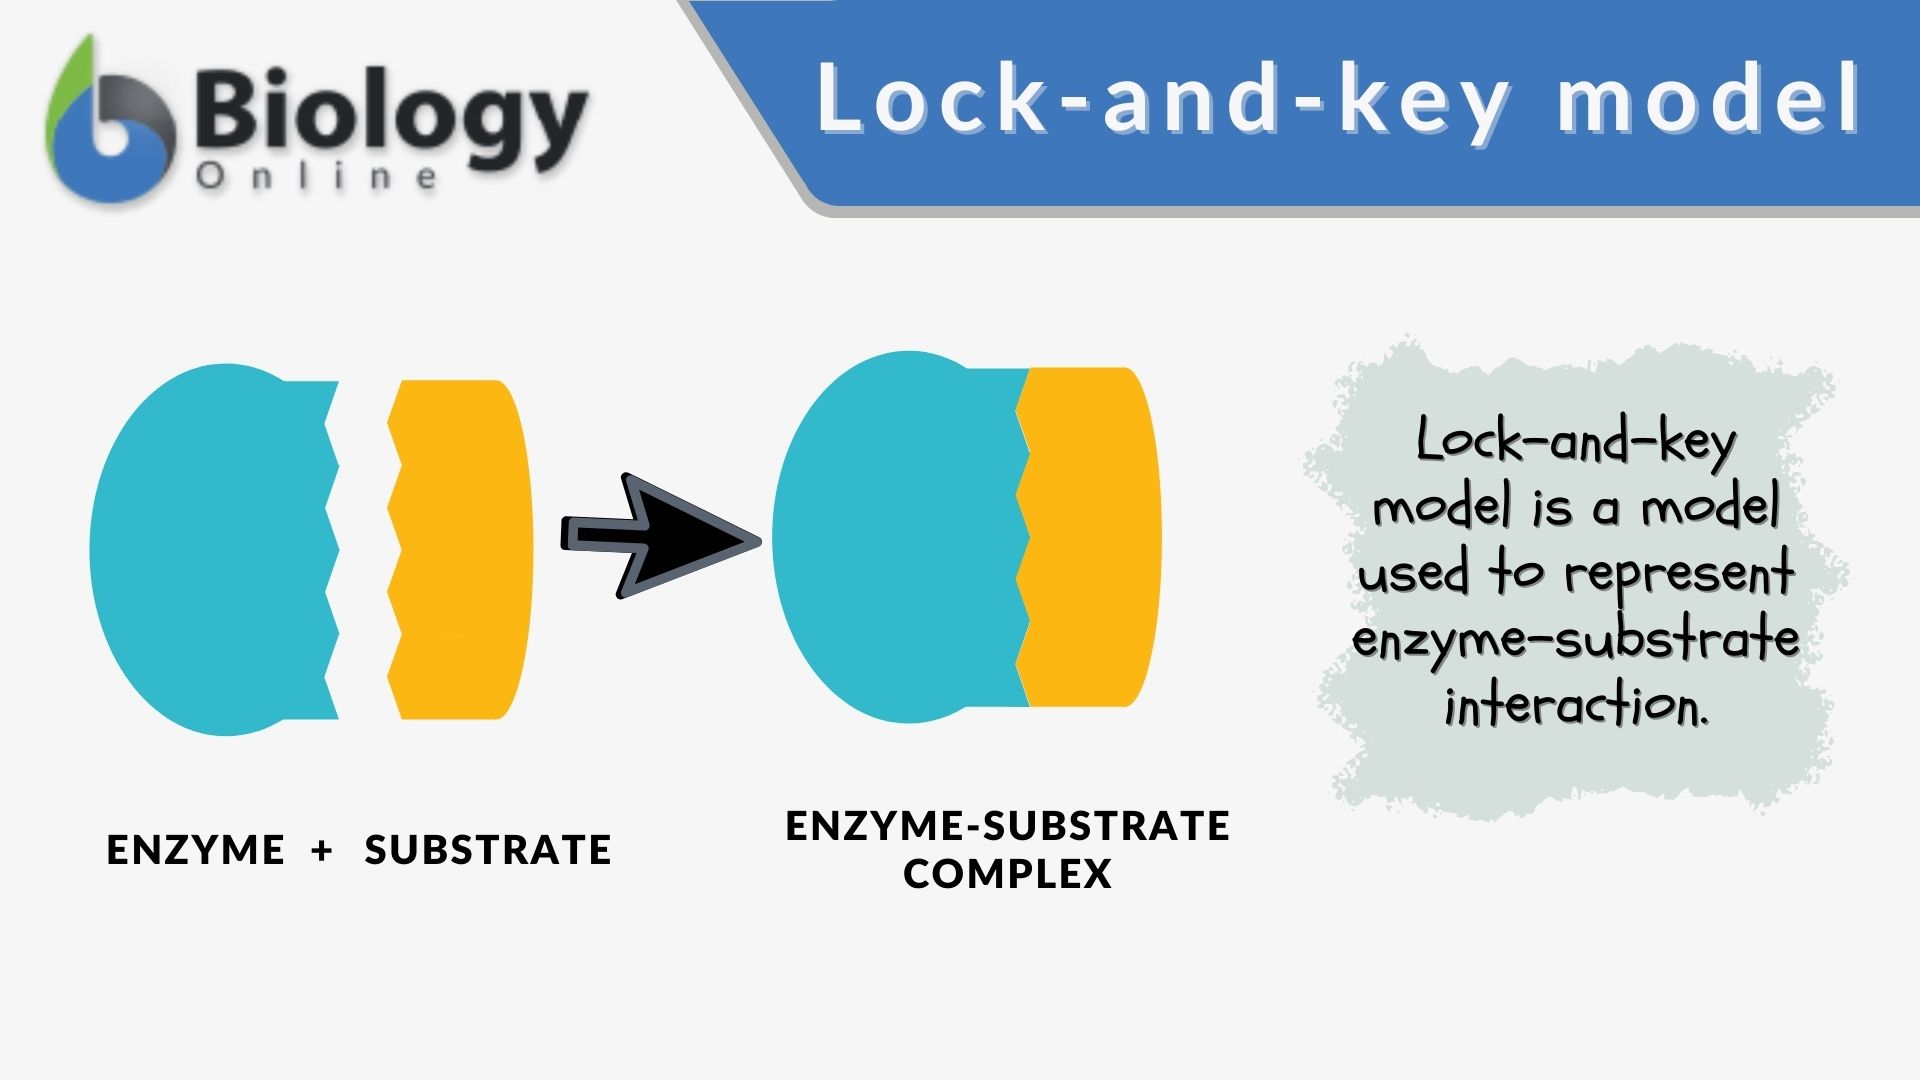 lock and key hypothesis was proposed by